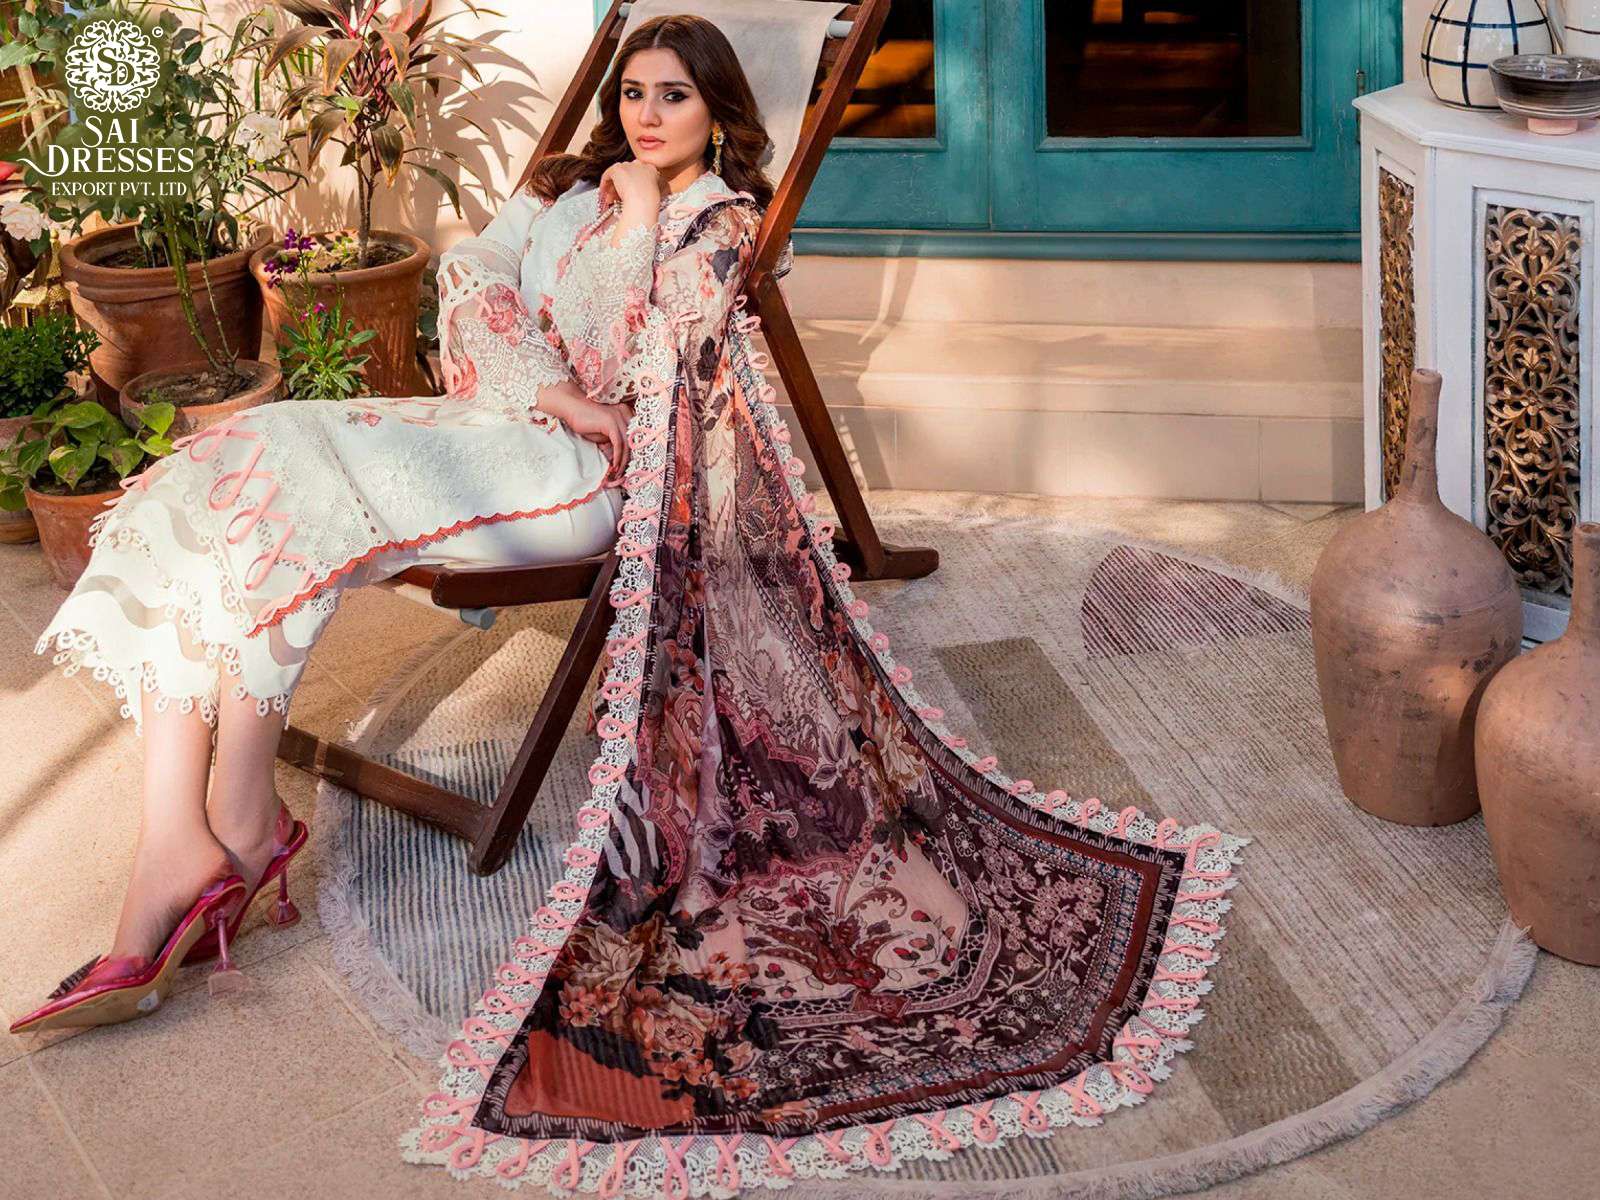 SAI DRESSES PRESENT FIRDOUS OMBRE VOL 2 NX SUMMER WEAR SELF EMBROIDERED FANCY PAKISTANI DESIGNER COLLECTION IN WHOLESALE RATE IN SURAT